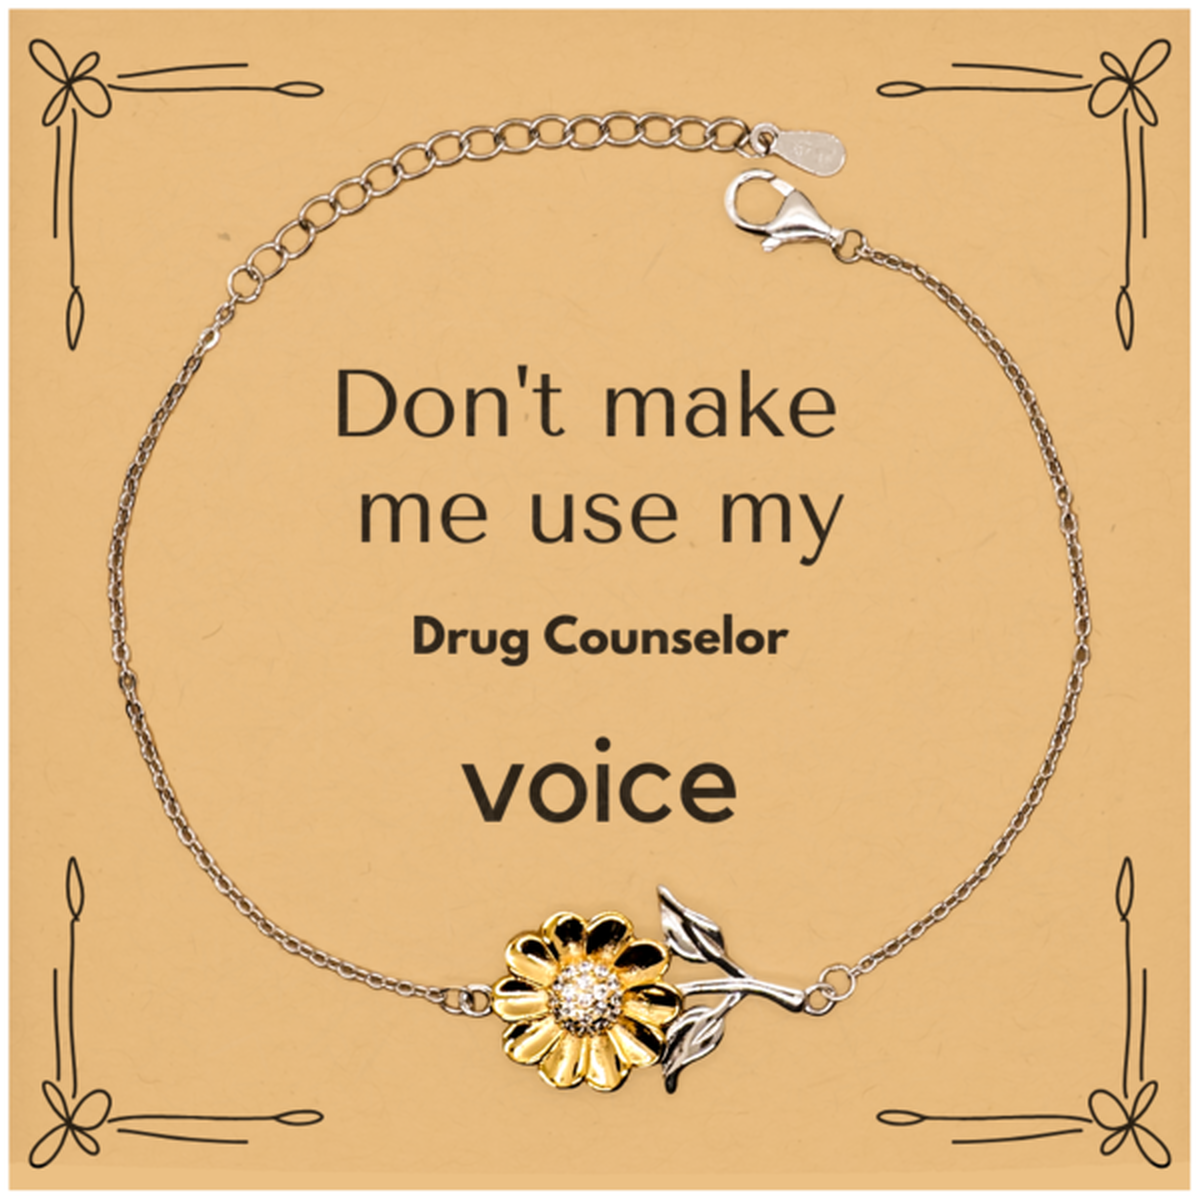 Don't make me use my Drug Counselor voice, Sarcasm Drug Counselor Card Gifts, Christmas Drug Counselor Sunflower Bracelet Birthday Unique Gifts For Drug Counselor Coworkers, Men, Women, Colleague, Friends